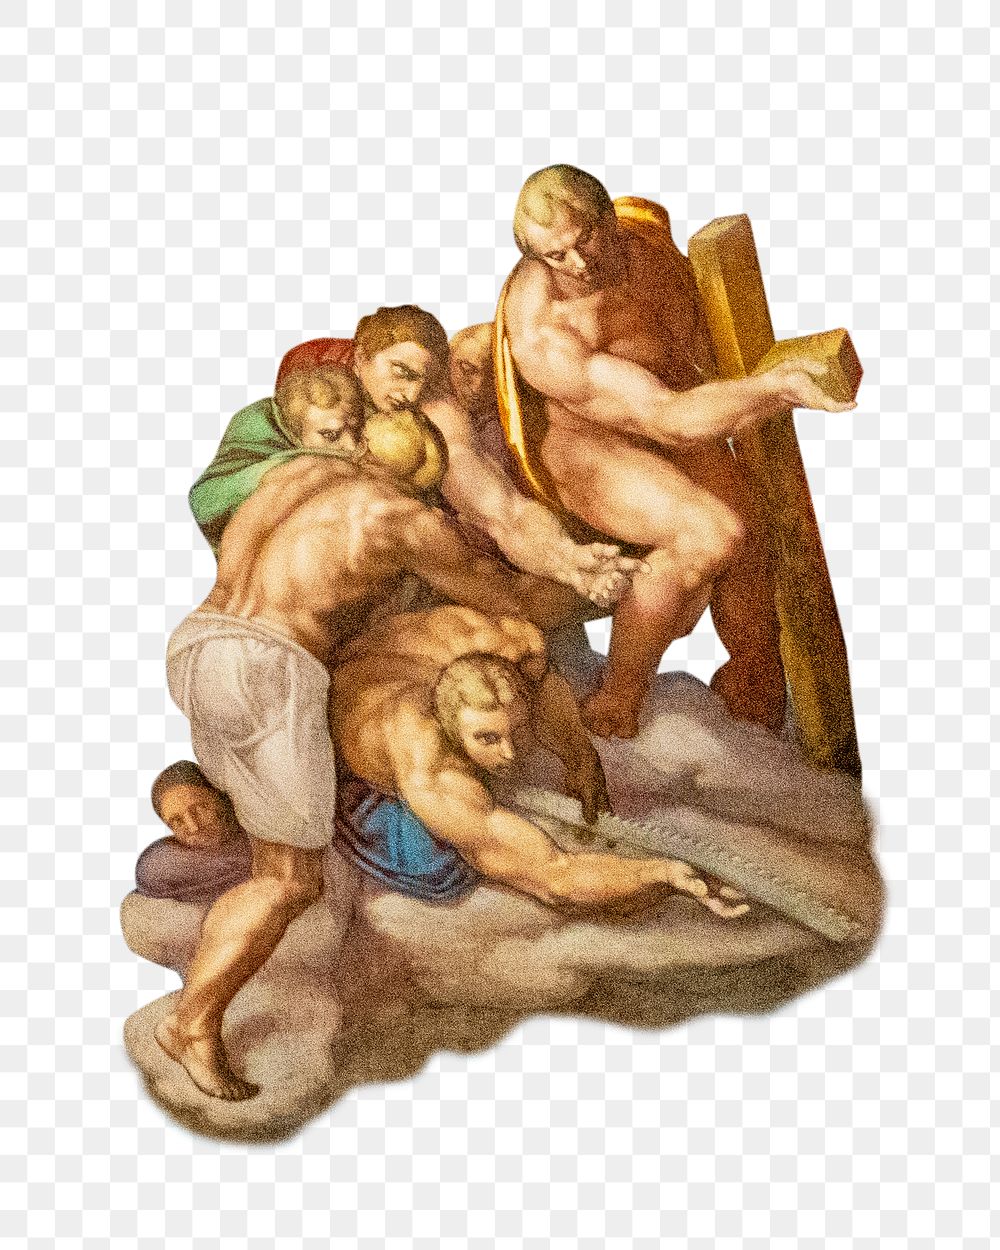 The Last Judgment png Sistine Chapel fresco sticker, ancient illustration in Vatican City on transparent background